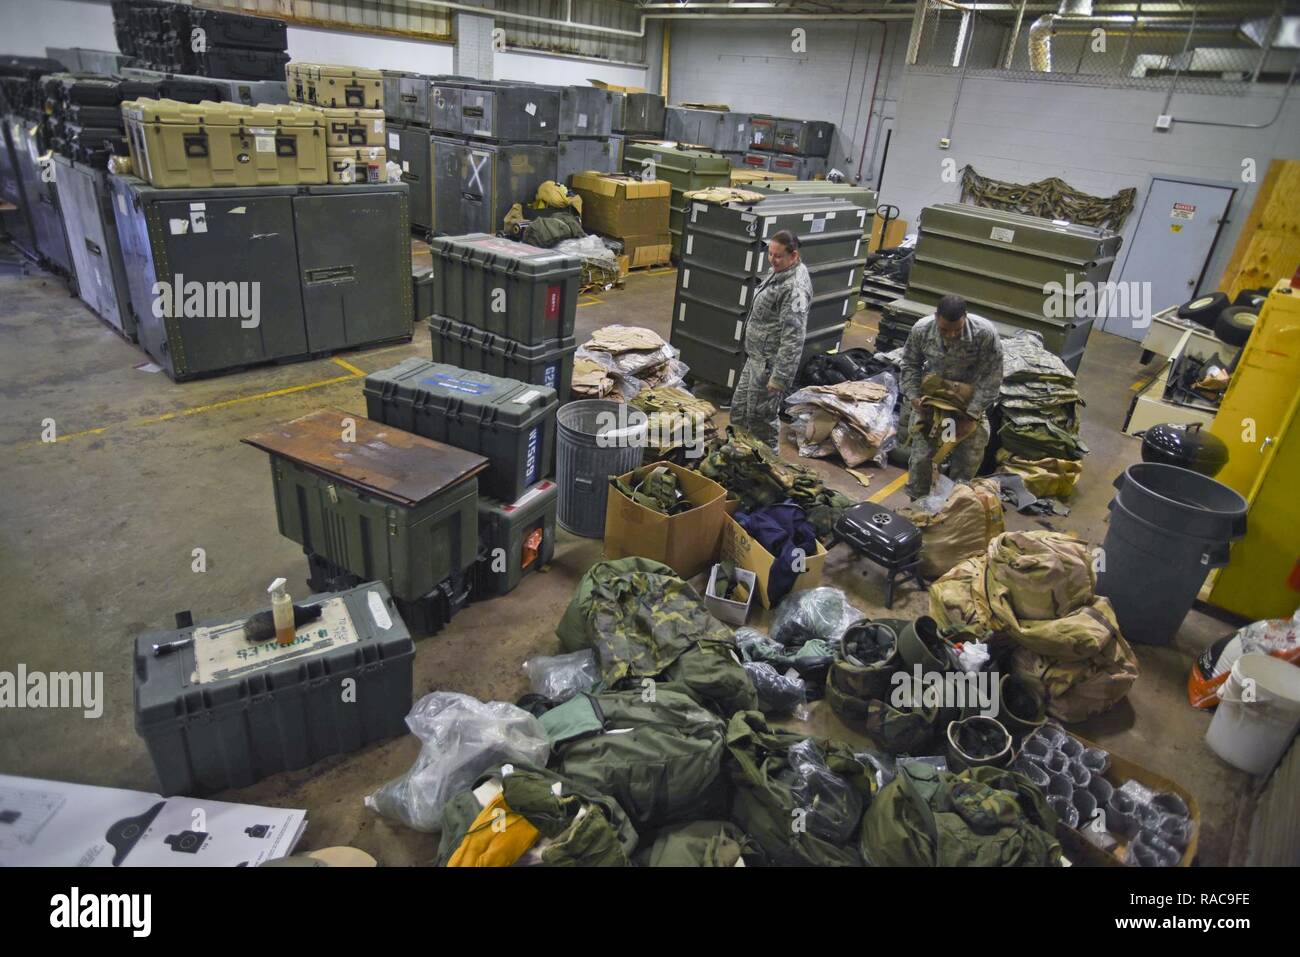 108th Security Forces Members inspect equipment in their storage facility before distribution at the 108th Wing, Joint Base McGuire-Dix-Lakehurst, N.J., Jan. 17, 2017. The Airmen prepare the gear for their activation to Washington D.C. in support of the 58th presidential inauguration. Stock Photo